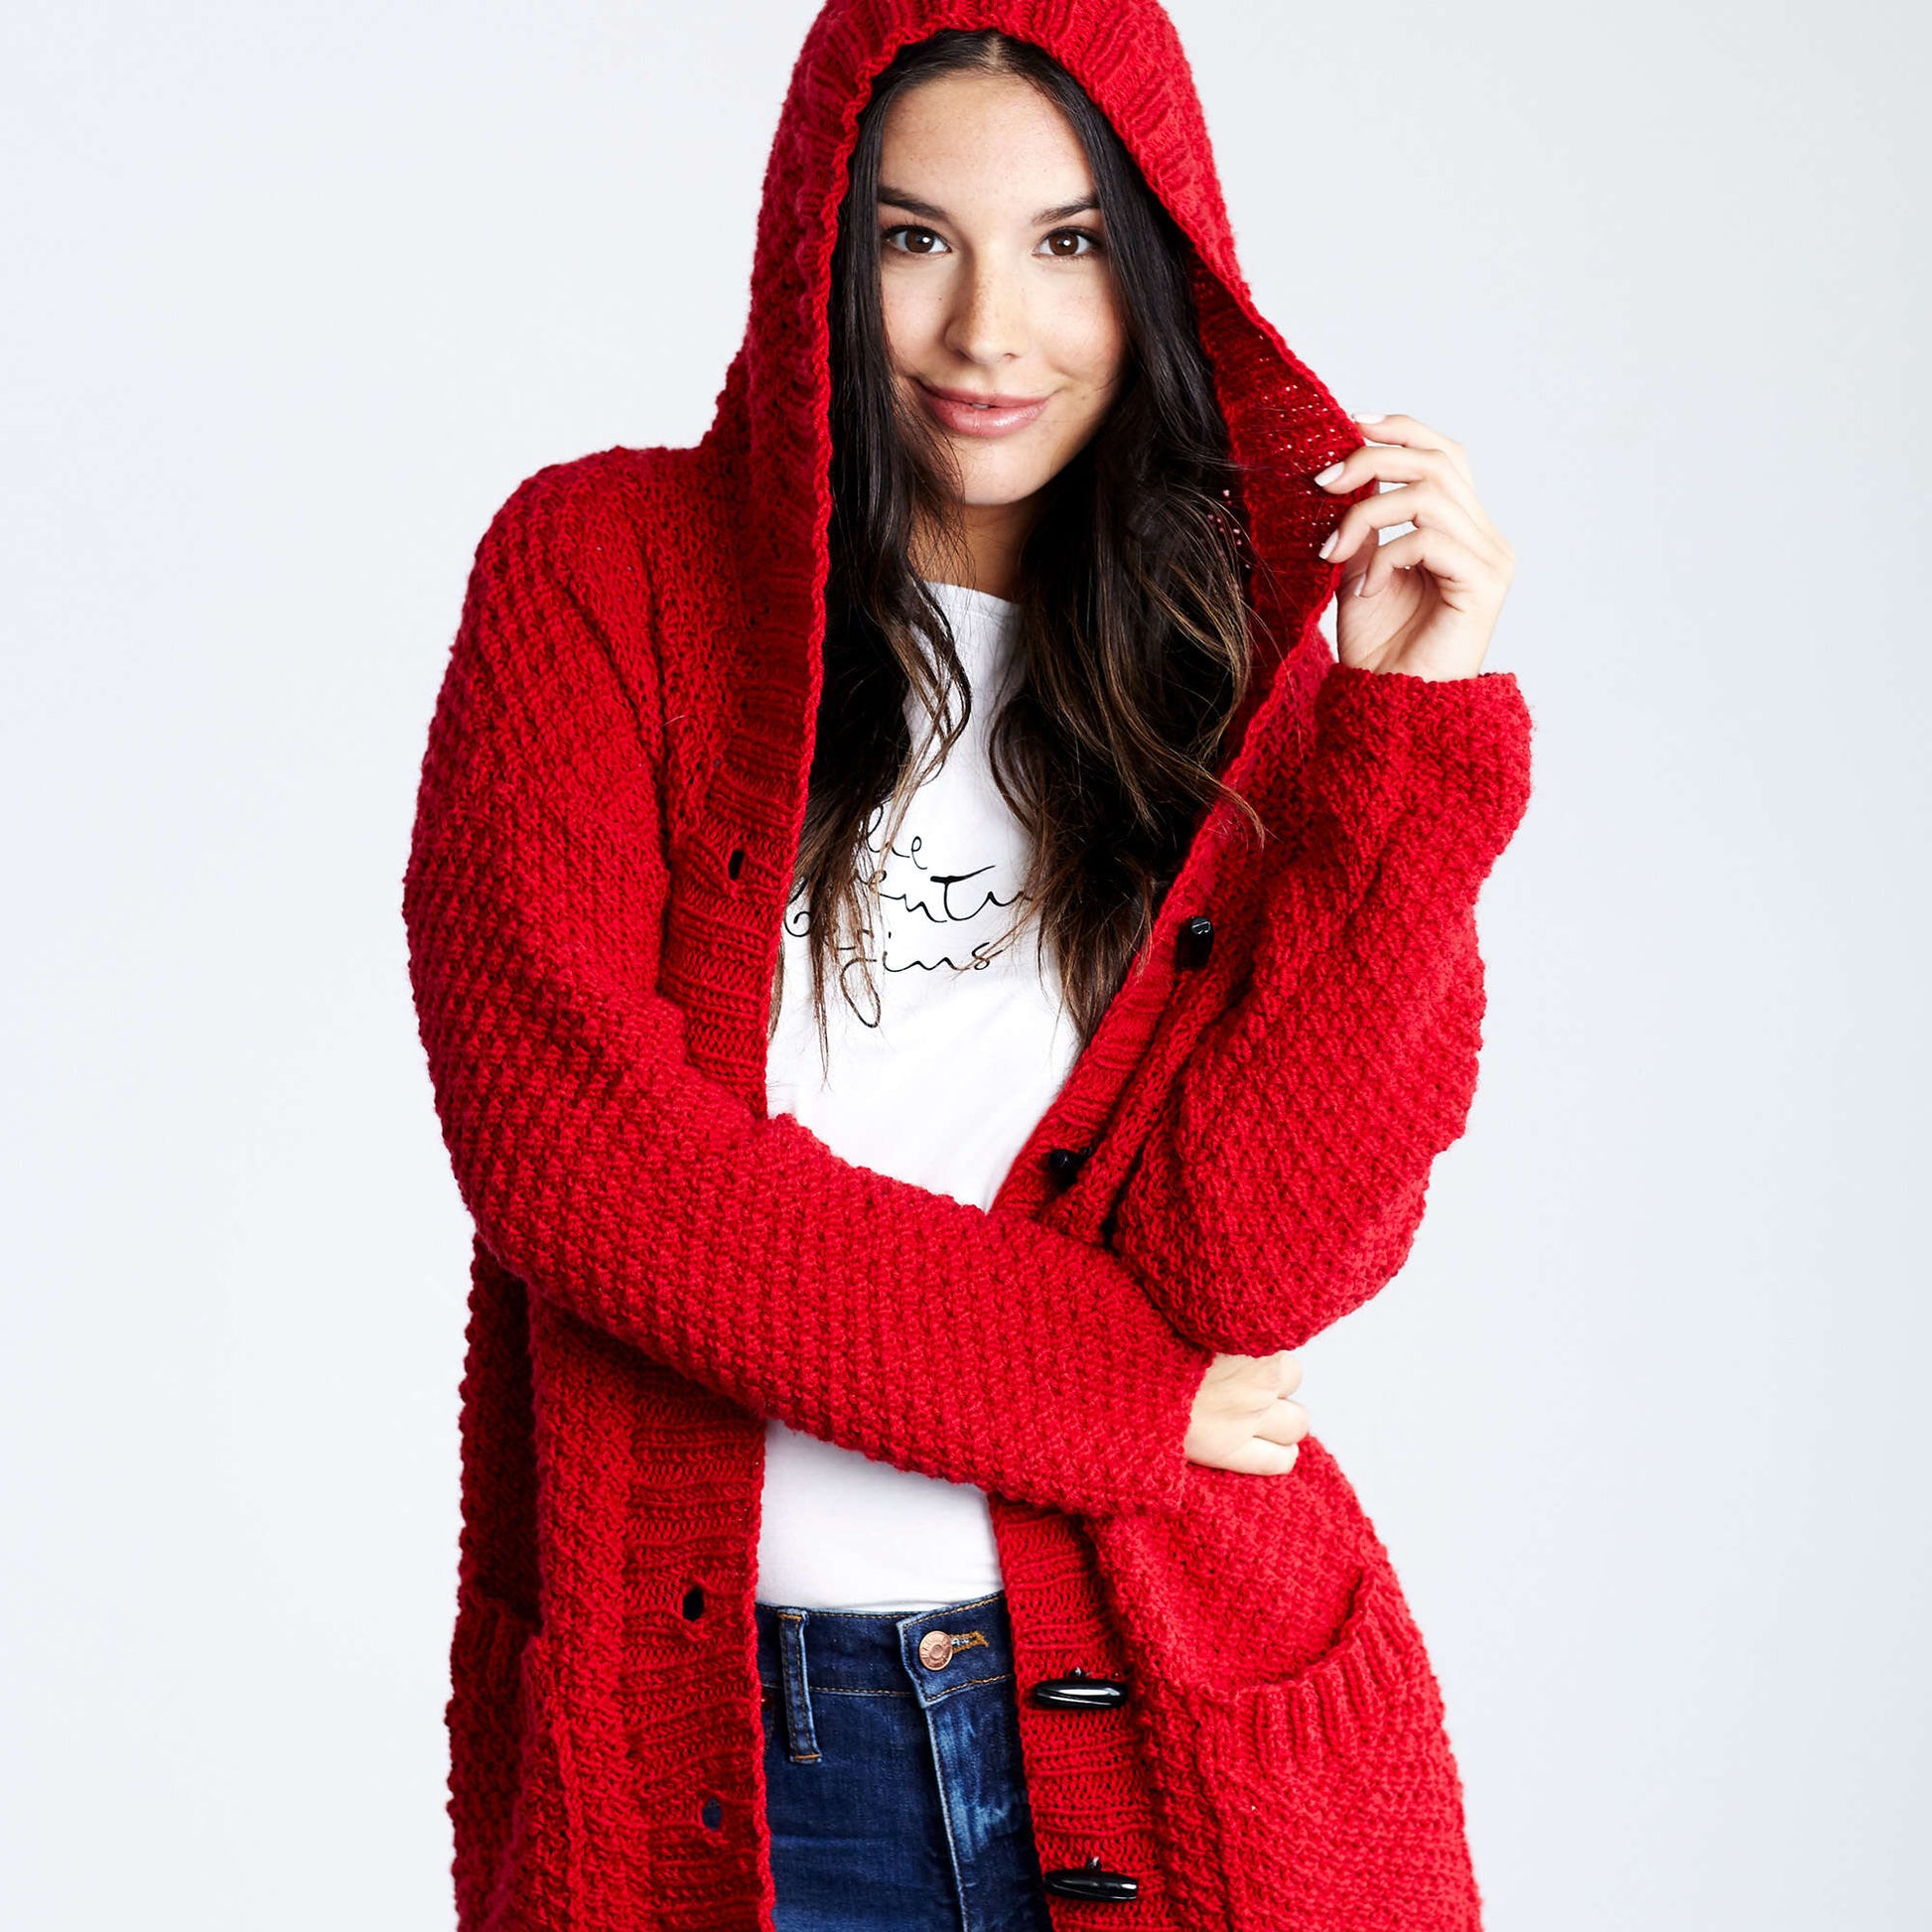 Free Red Heart Lazy Day Chic Sweater Knit Pattern